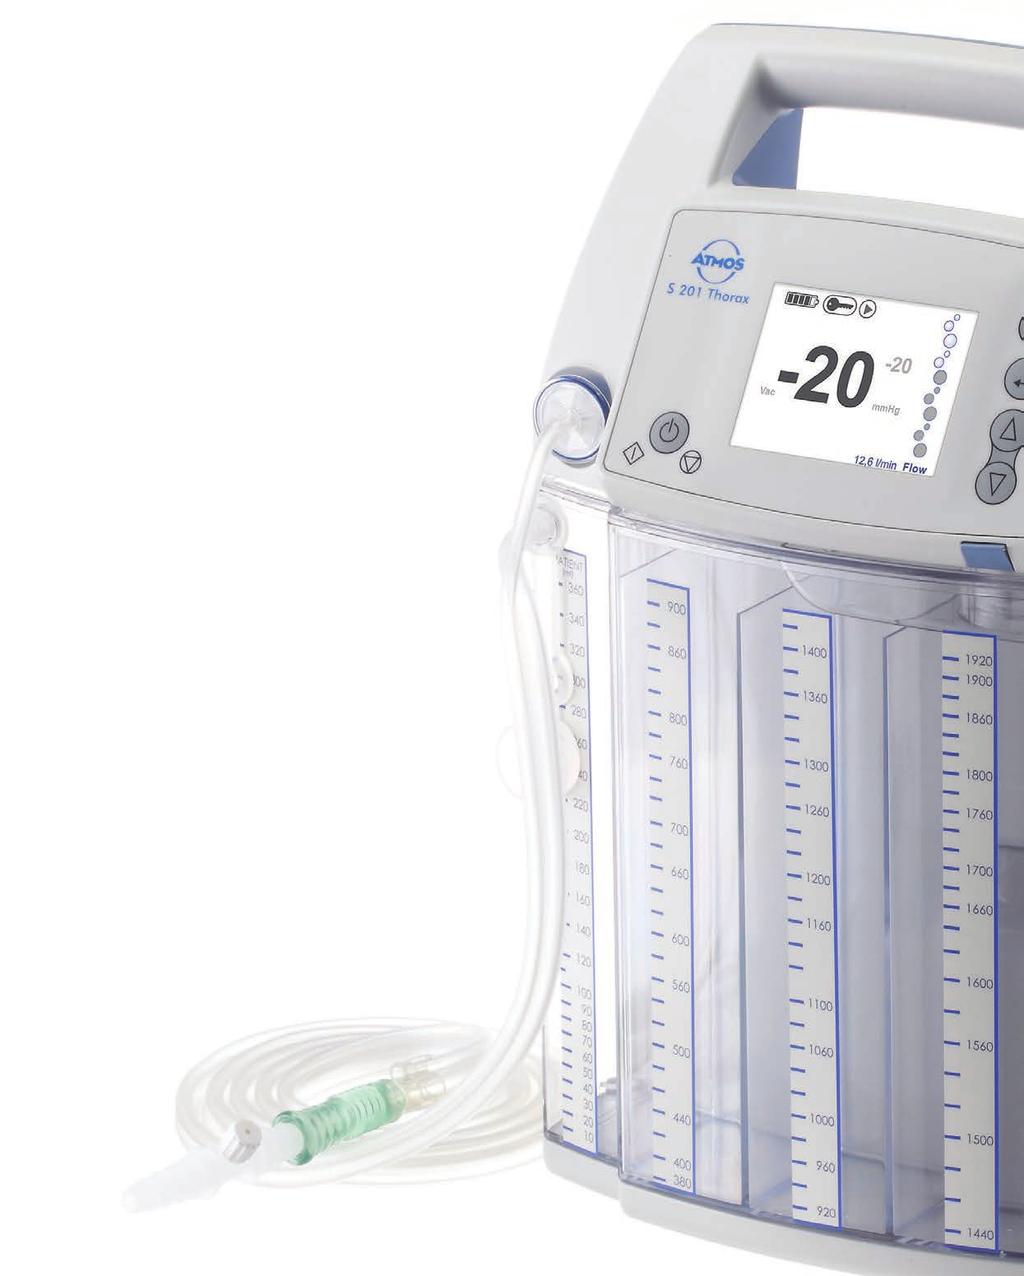 The option of having the water chamber with the ATMOS S 201 Thorax system allows the experienced nurse and surgeon to blend the two systems (analog and digital) together, and help them understand the